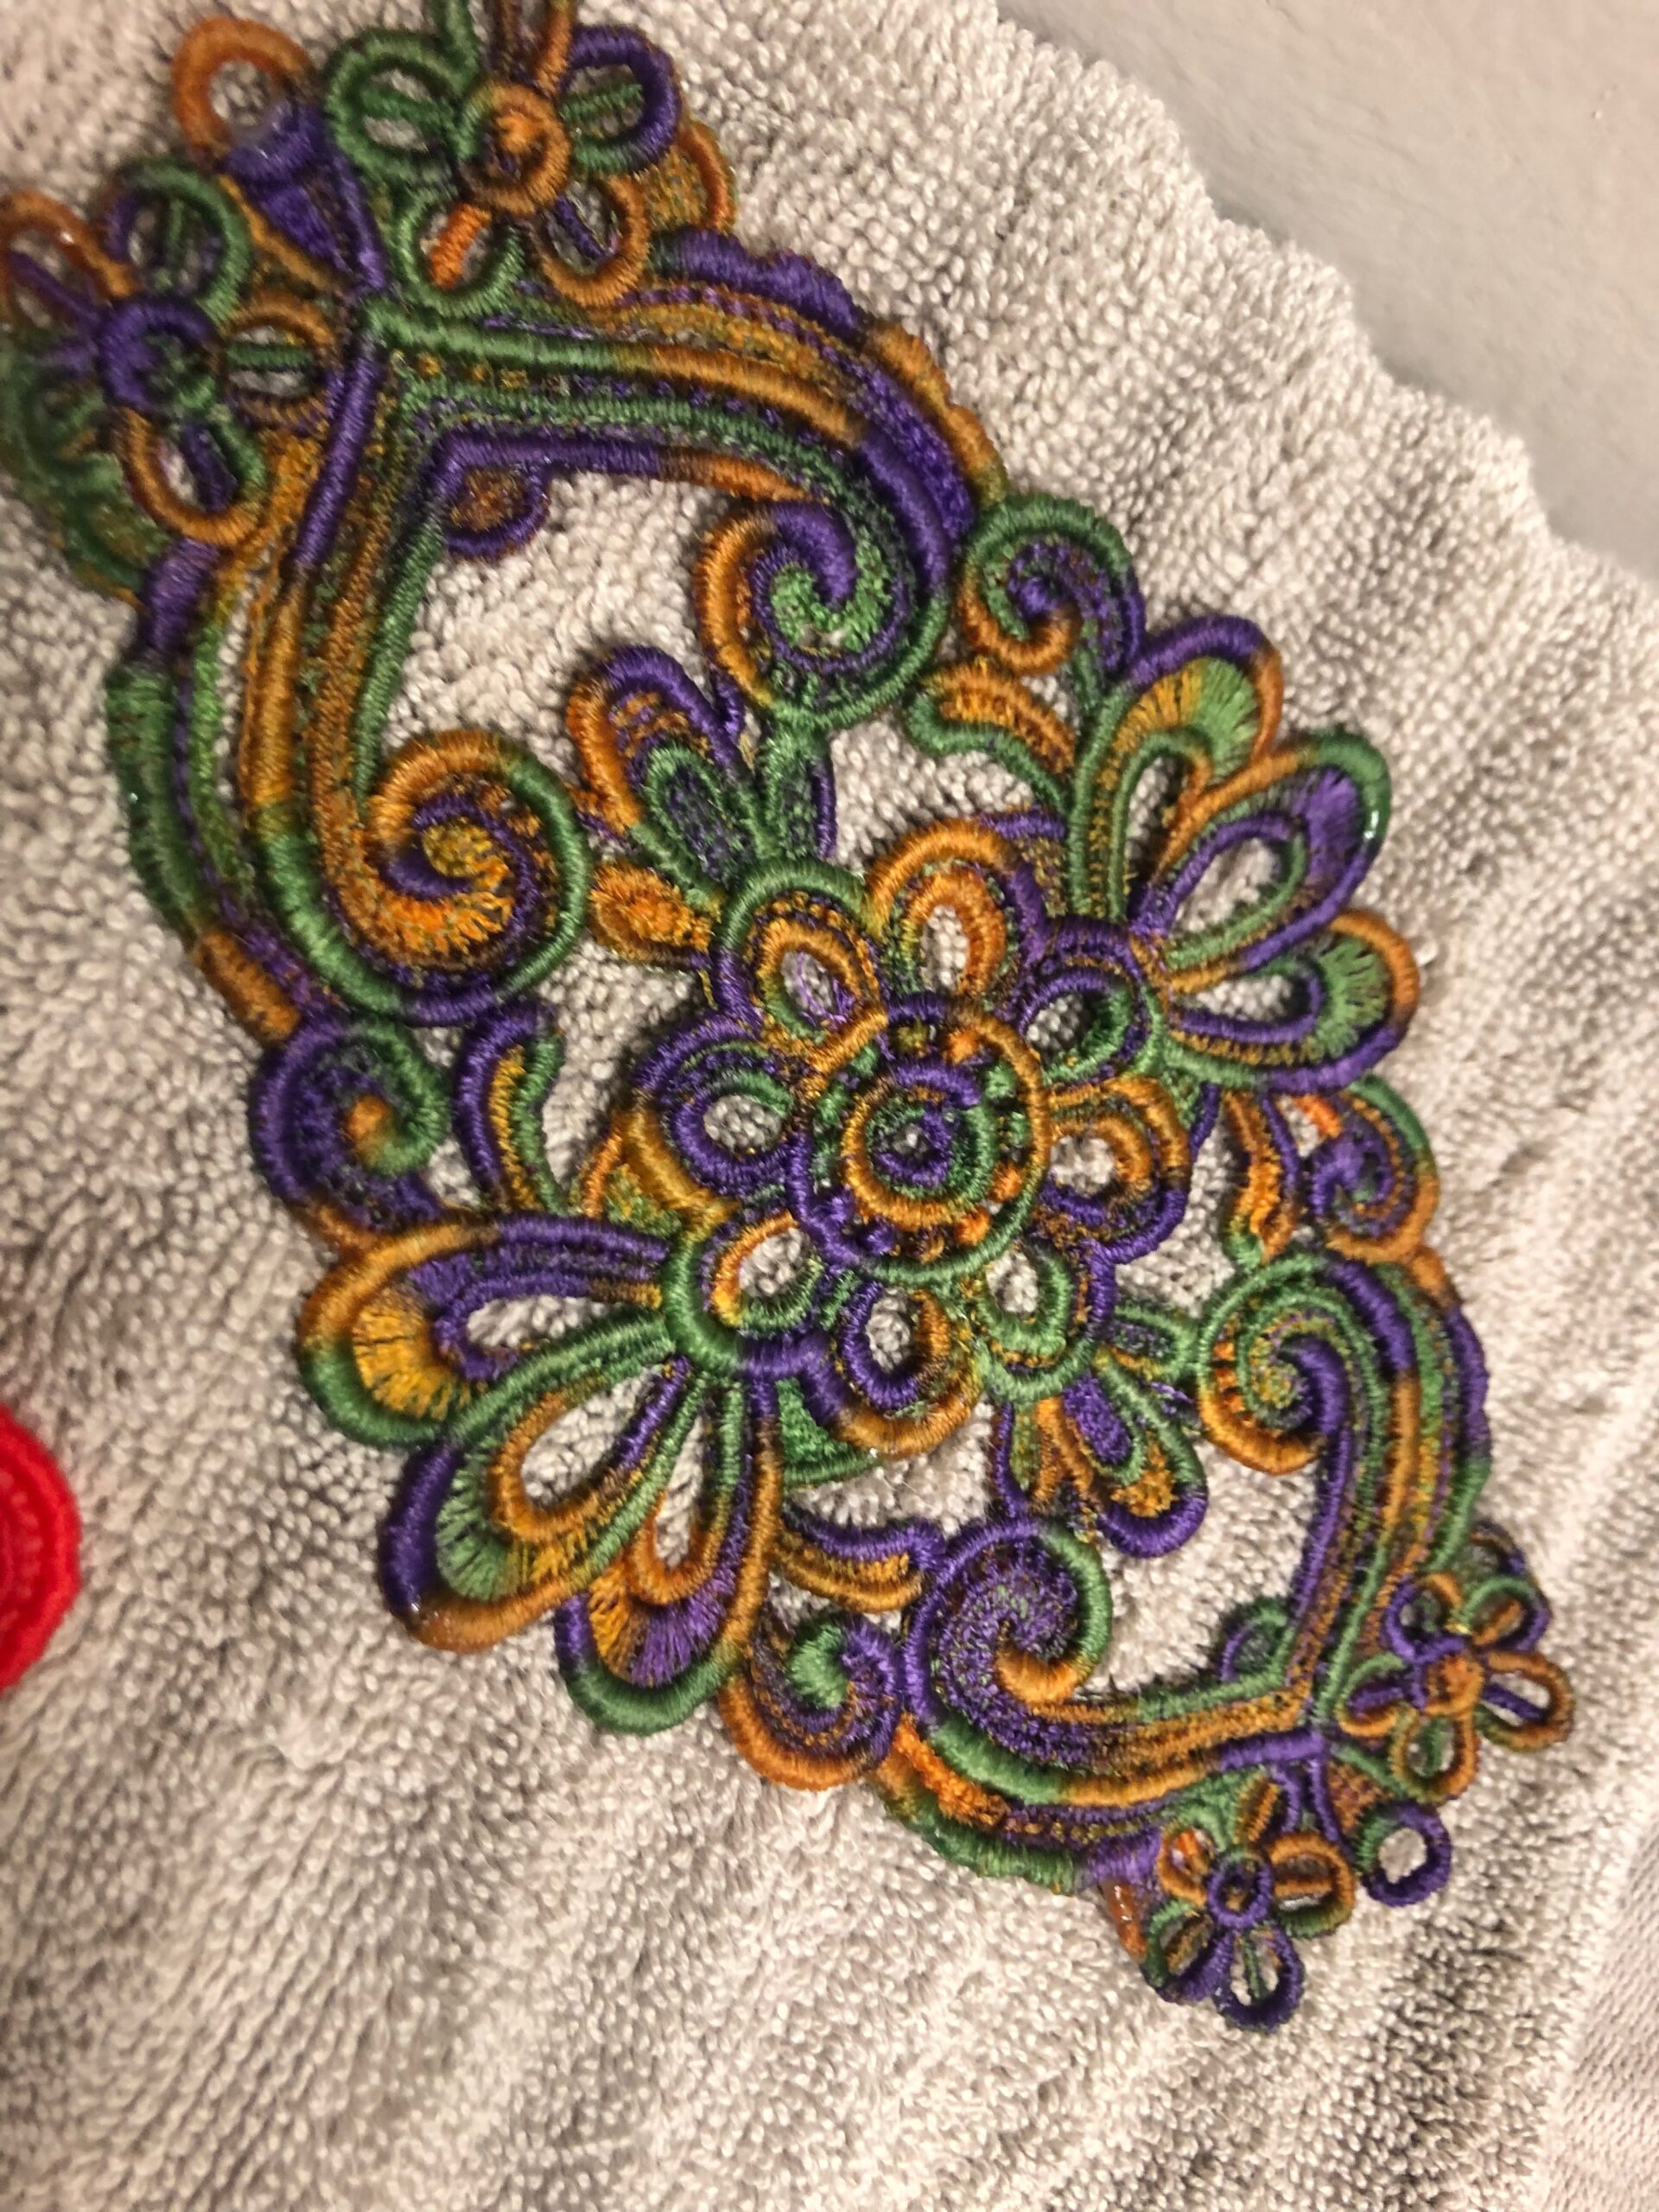 Intro to Machine Embroidery, Part 1: Stabilizer and Hooping Basics